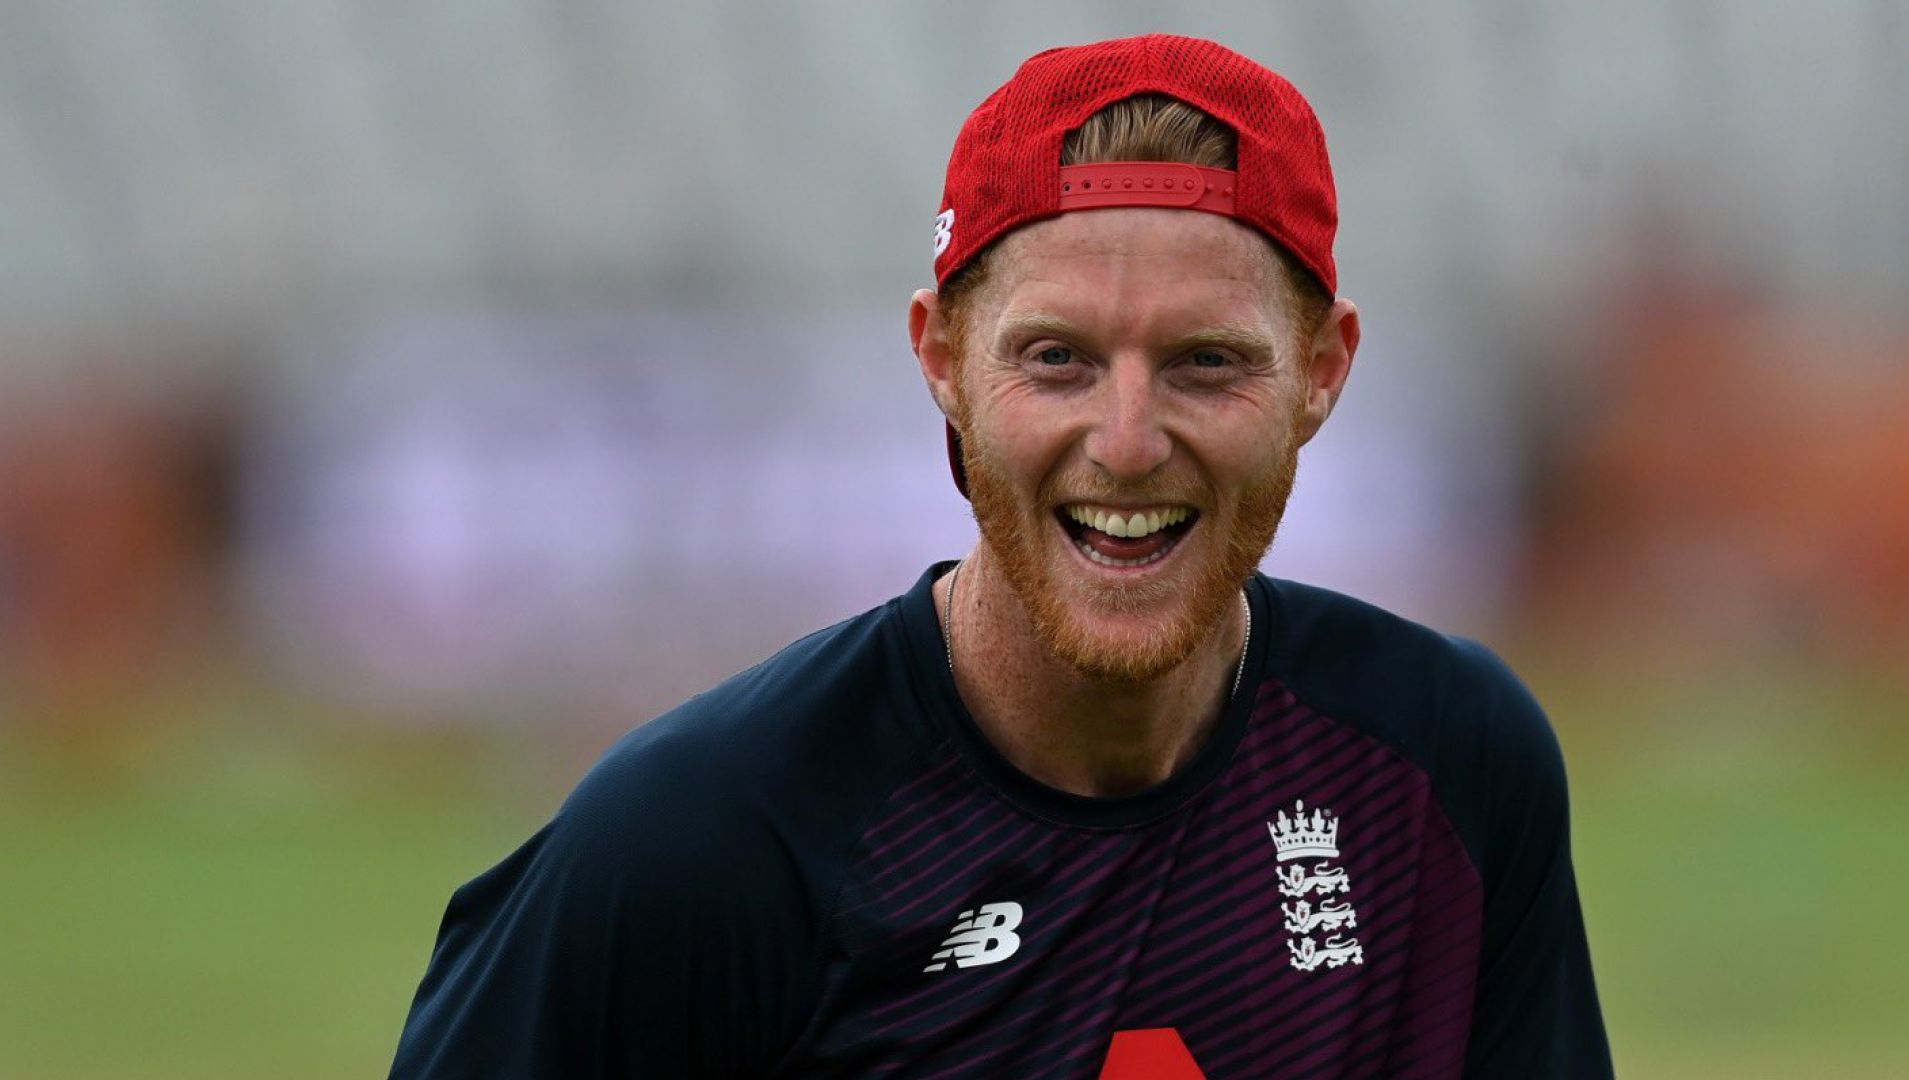 Key England players to miss New Zealand Test series due to IPL